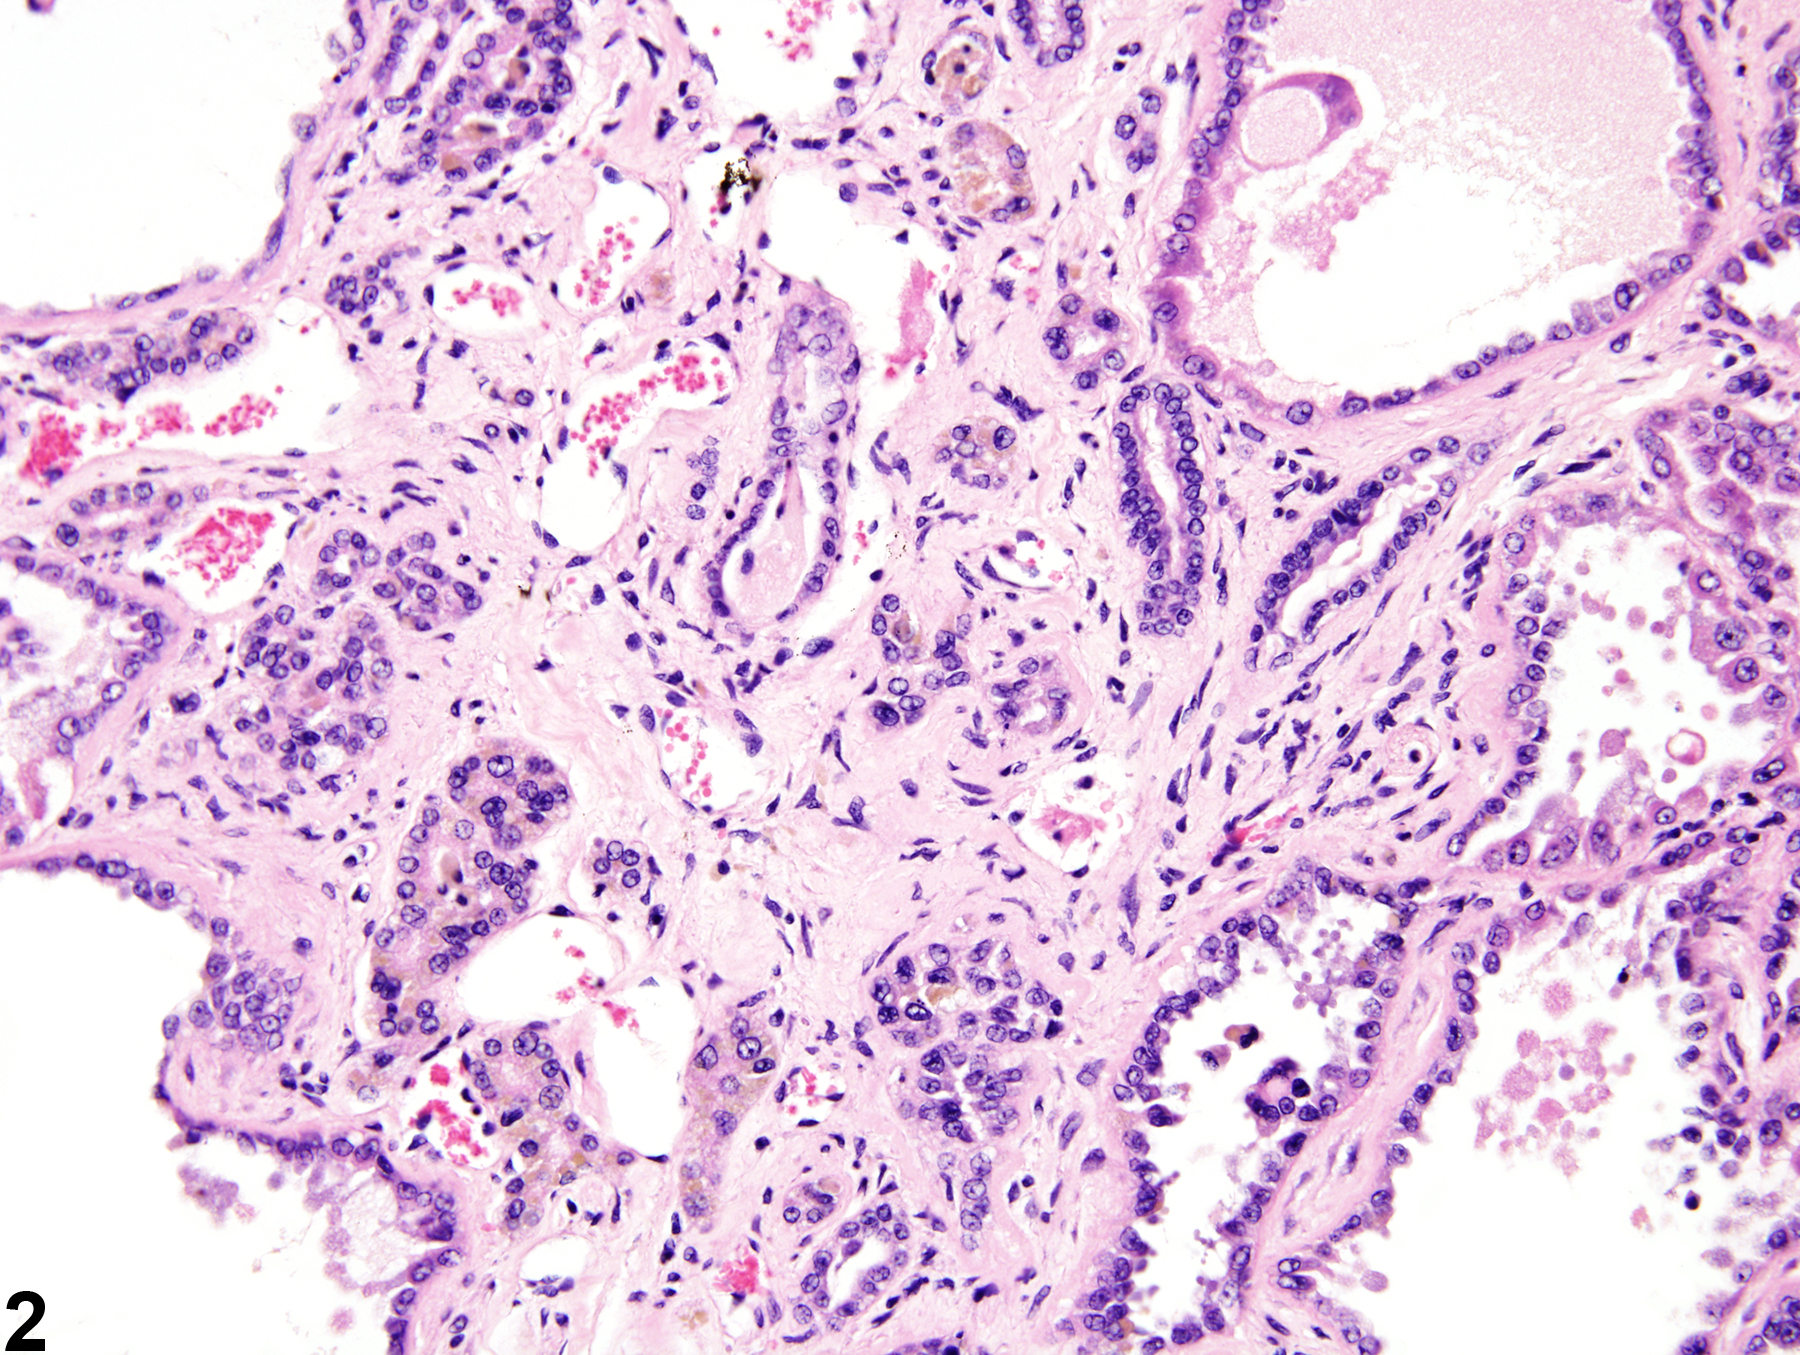 Image of fibrosis in the kidney from a male F344/N rat in a chronic study